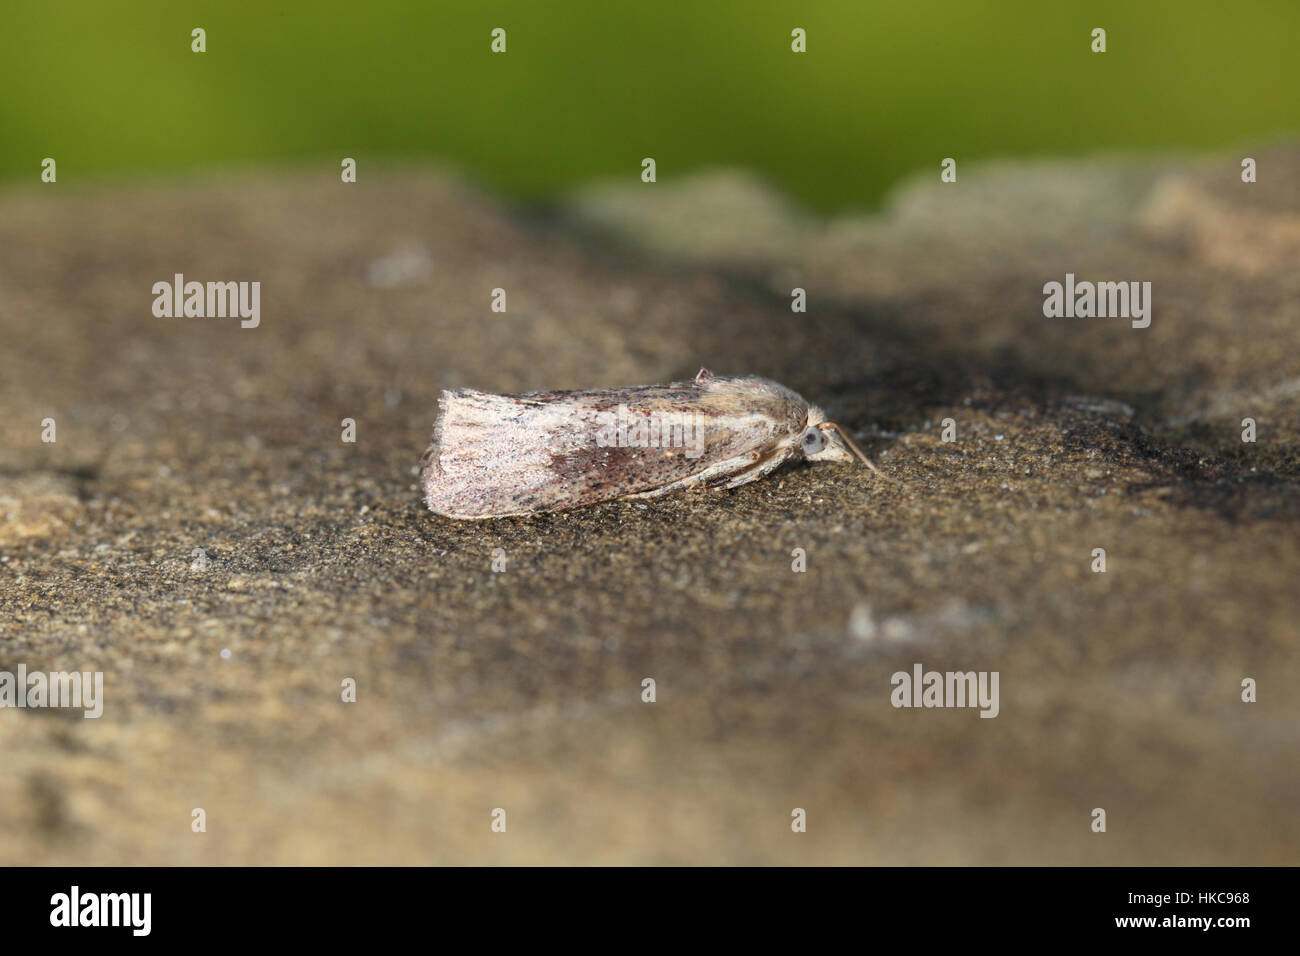 Wax Moth (Galleria mellonella) - a small moth with large, pale blue eyes, sitting on a rock in a suburban garden Stock Photo